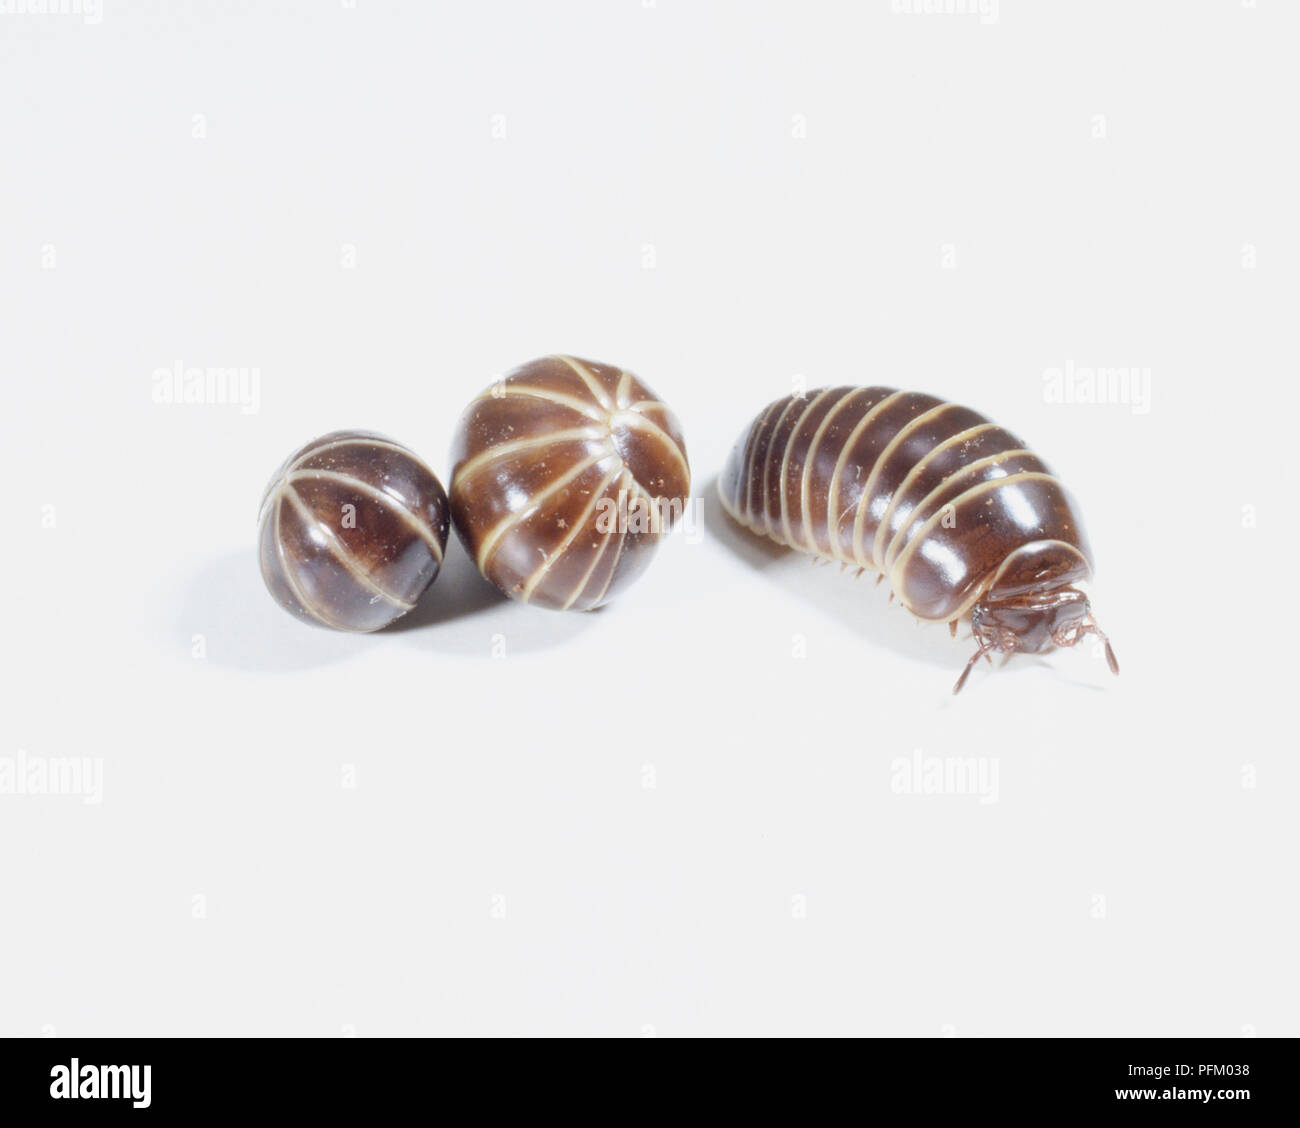 Pill millipede (Glomeris sp.), shown at three stages of unfurling Stock Photo